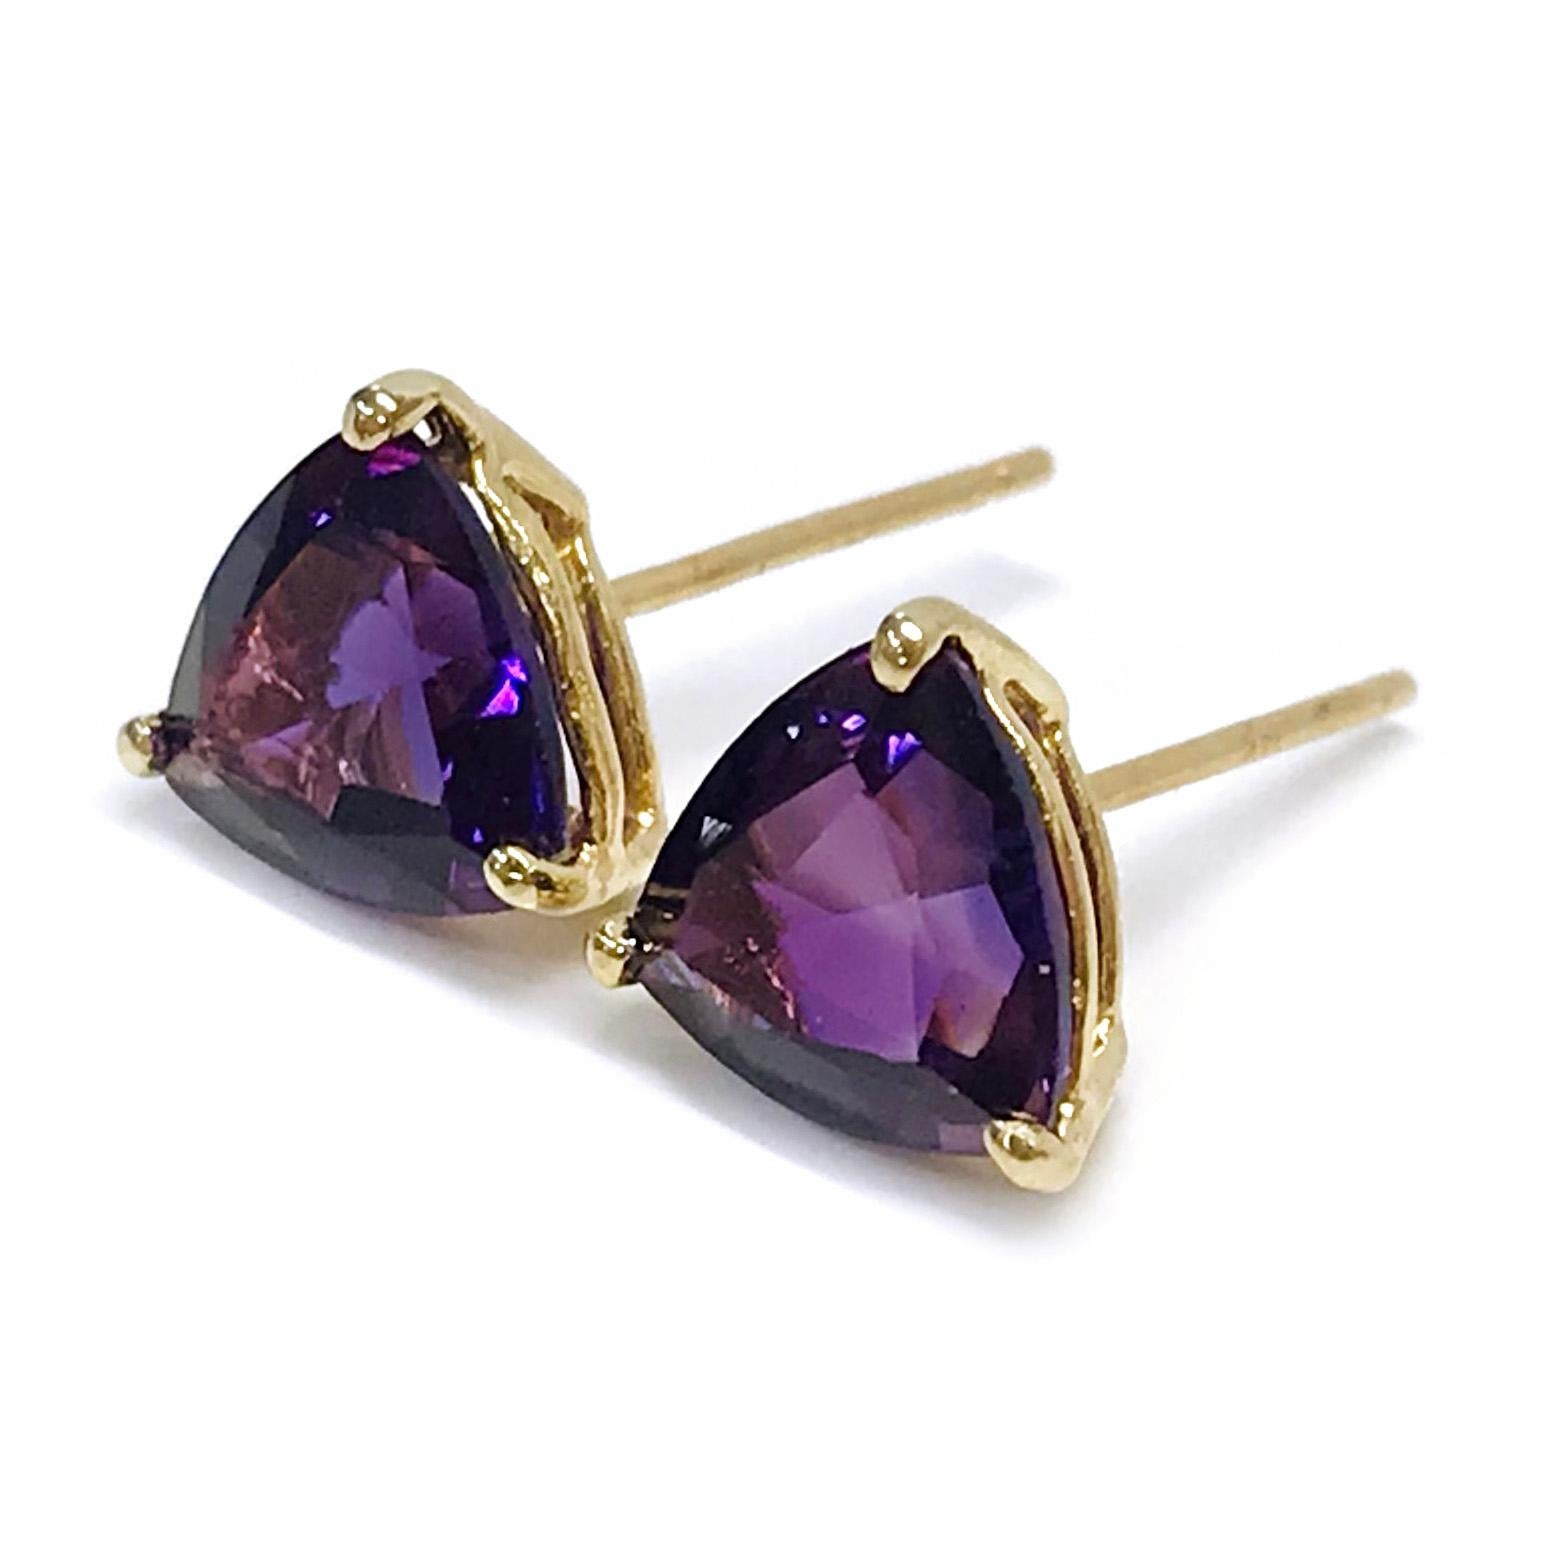 14 Karat Yellow Gold Amethyst Stud Earrings. The earrings each feature a 7 x 7mm trillion-cut Amethyst stone. The medium colored purple gemstones are three-prong-set.. The total weight of the earrings is 1.35 grams.